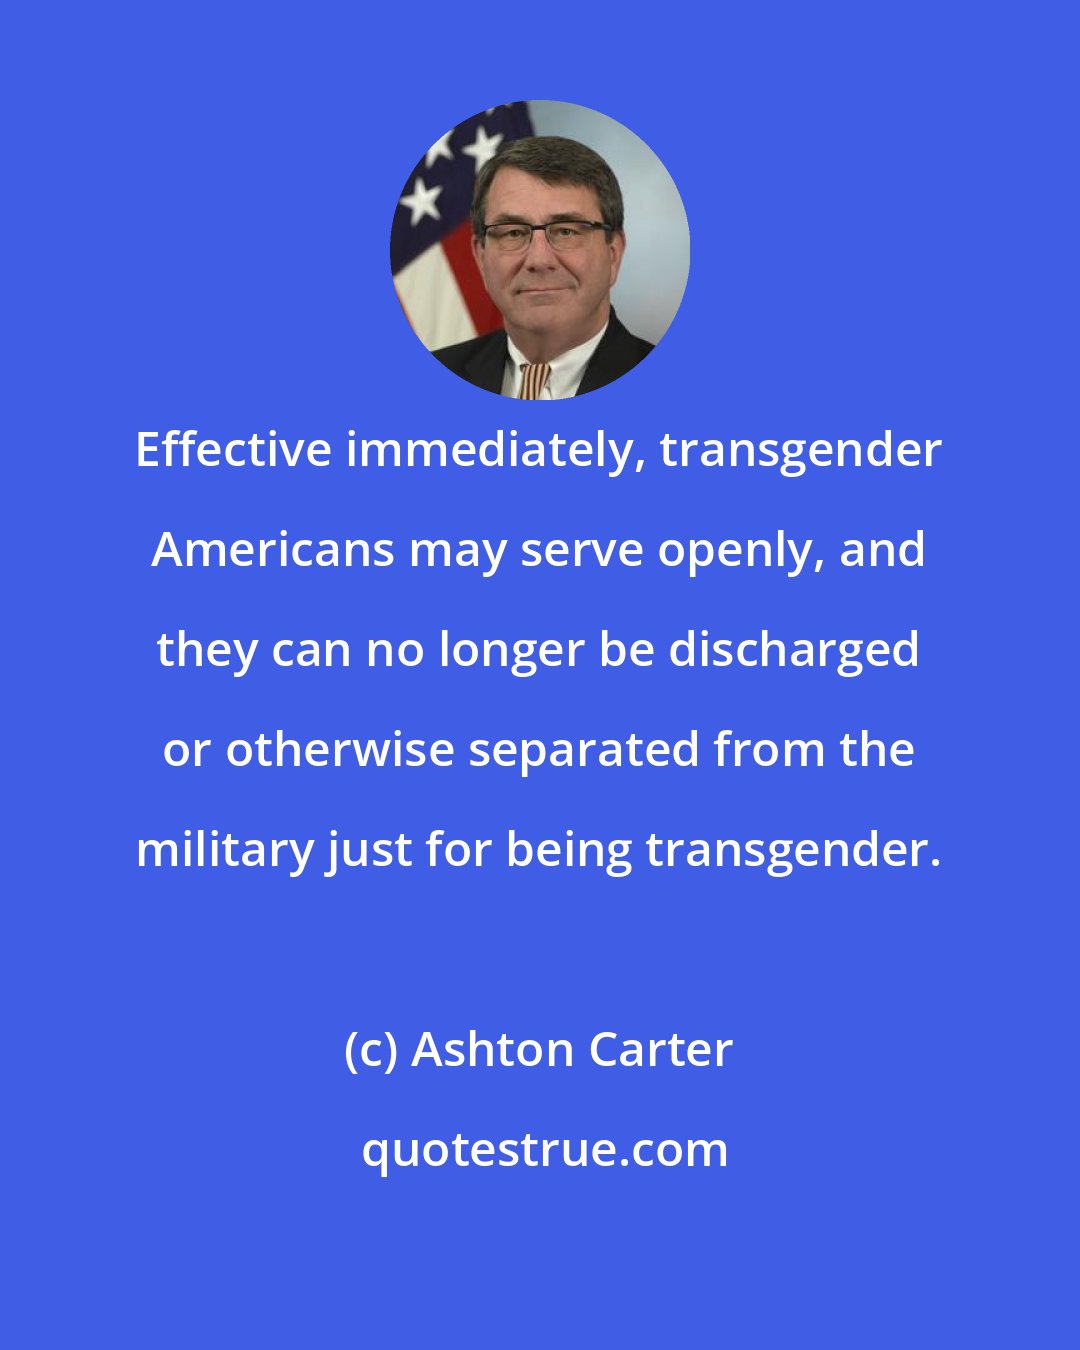 Ashton Carter: Effective immediately, transgender Americans may serve openly, and they can no longer be discharged or otherwise separated from the military just for being transgender.